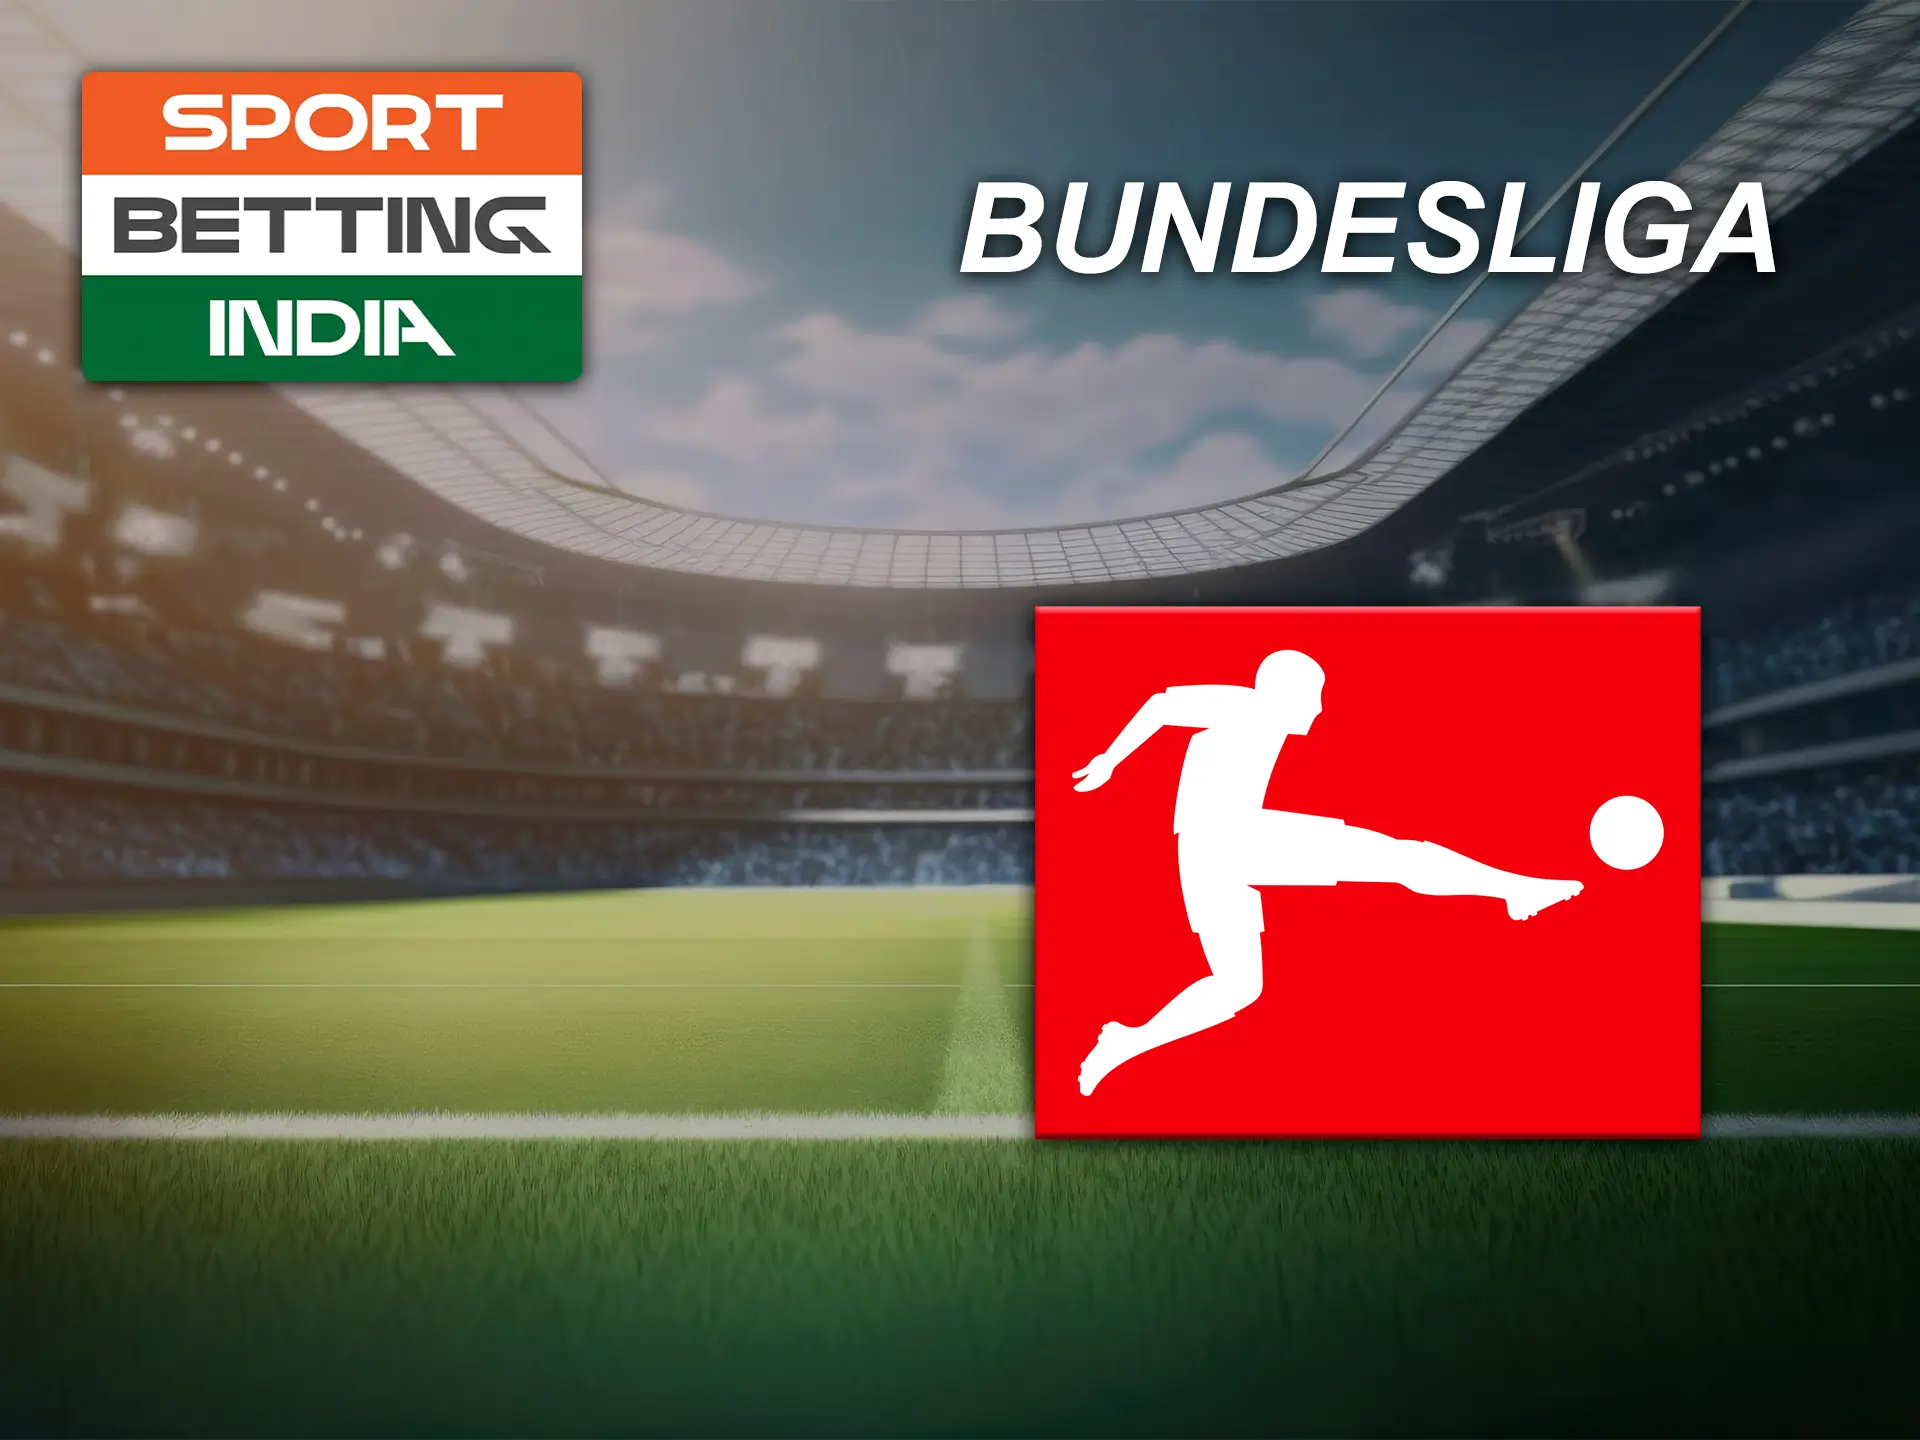 The Bundesliga is renowned for its strong football tactics and top coaches.